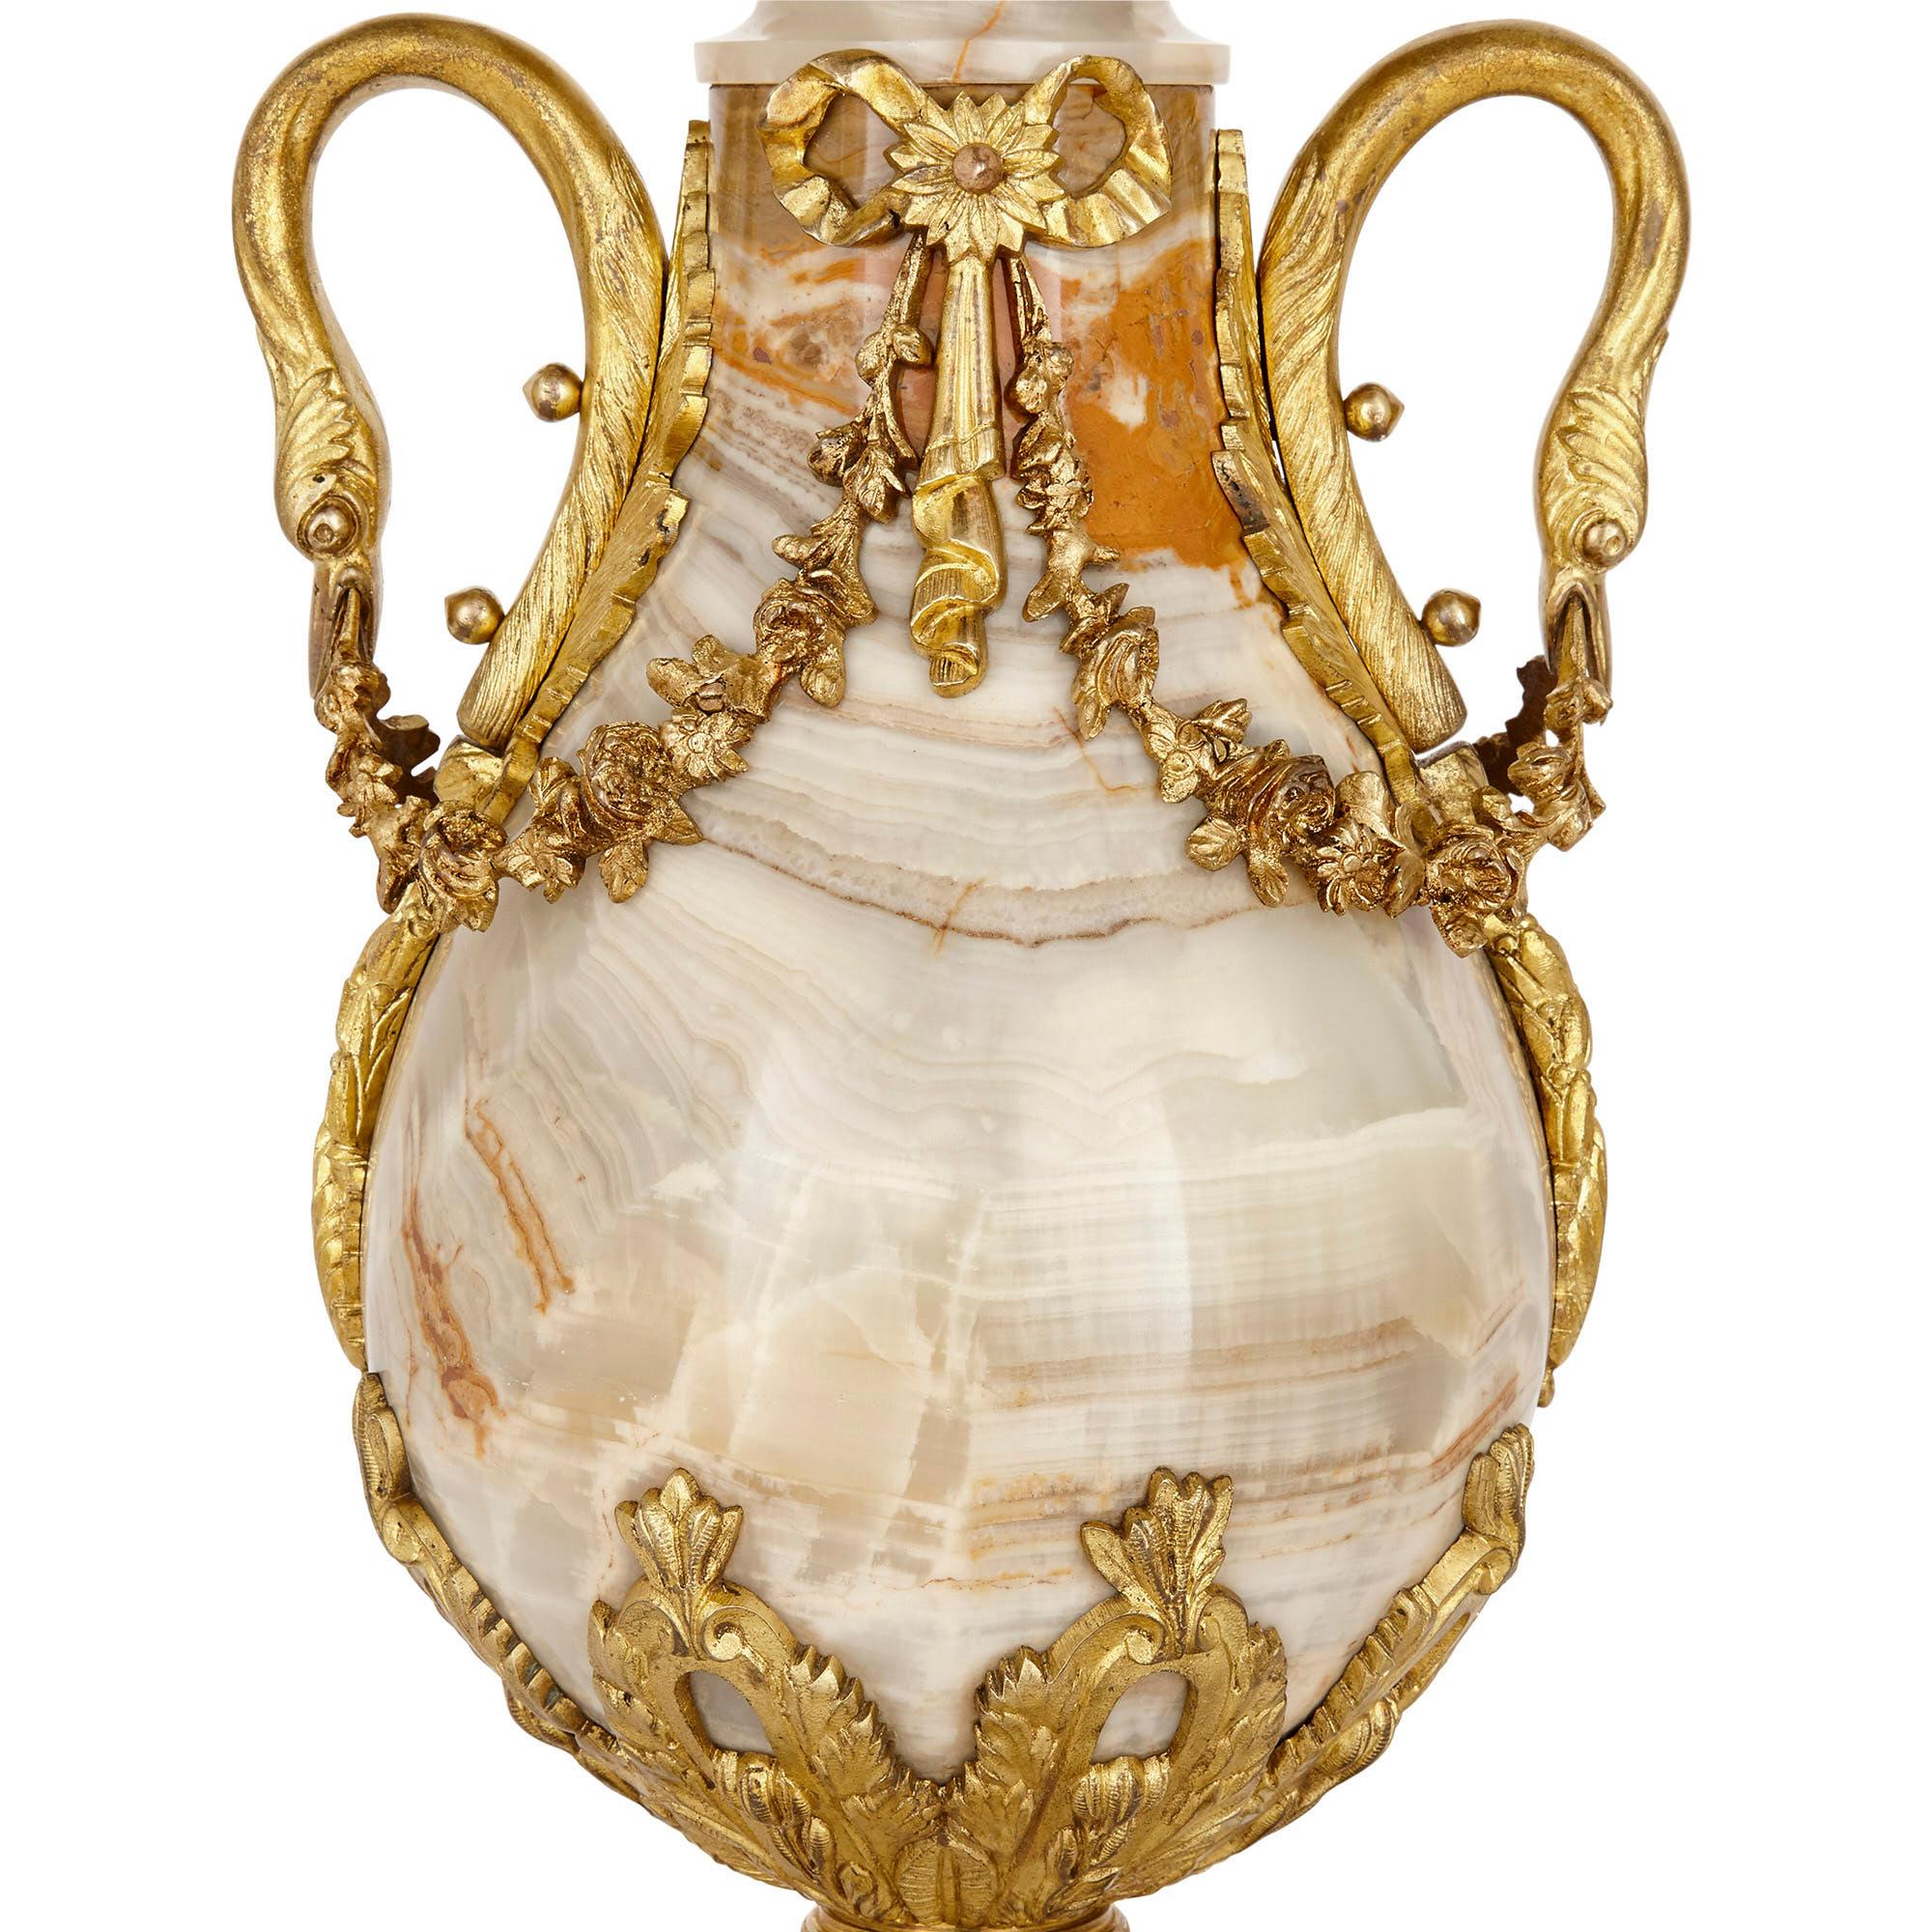 French Pair of Neoclassical Style Onyx and Gilt Bronze Vases